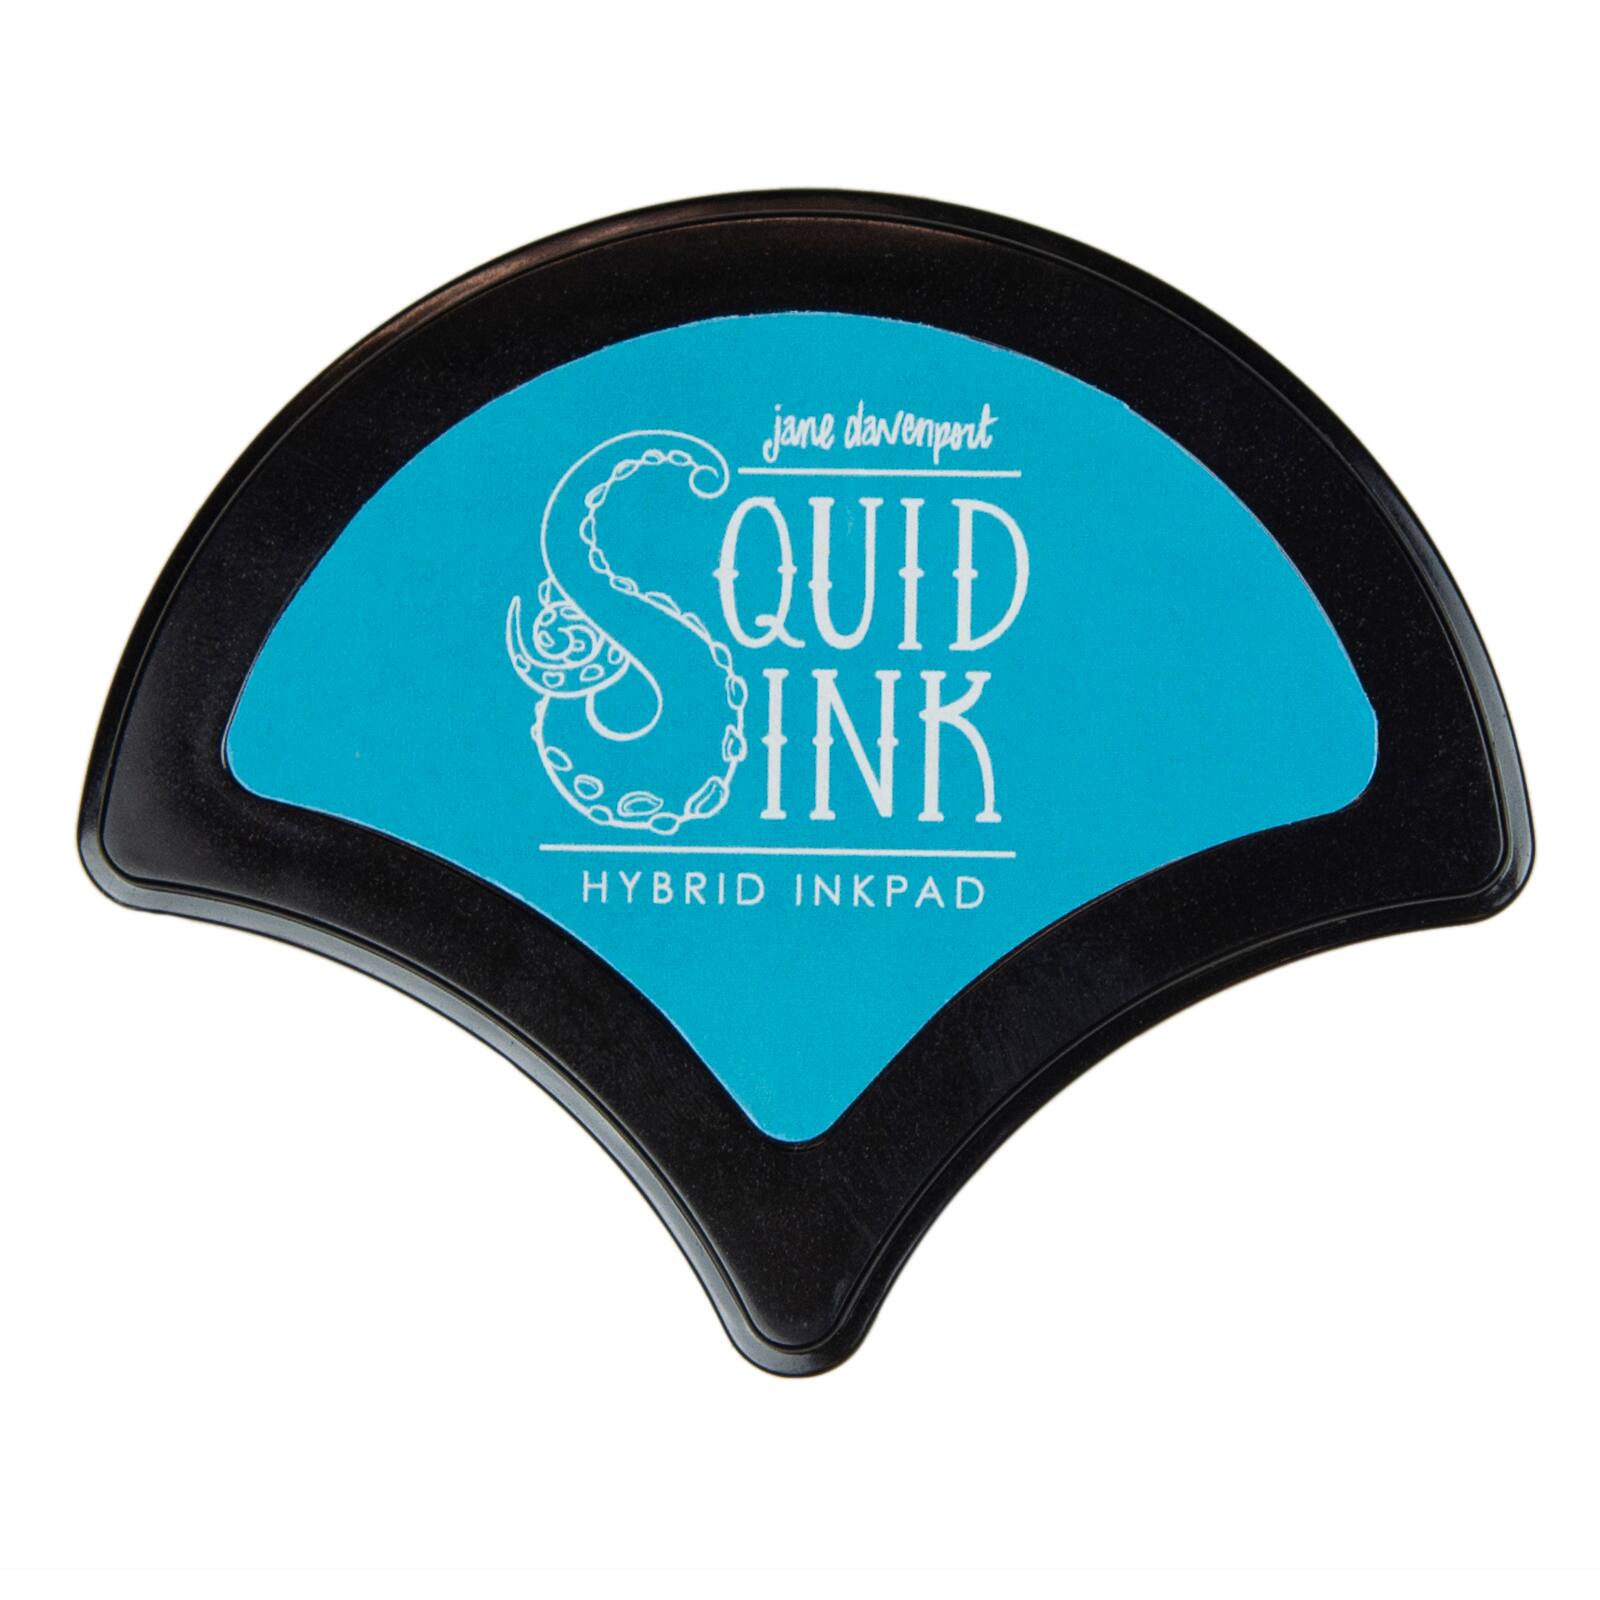 Shop for the Jane Davenport Squid Ink Hybrid Ink Pad, Blue Marlin at Michaels